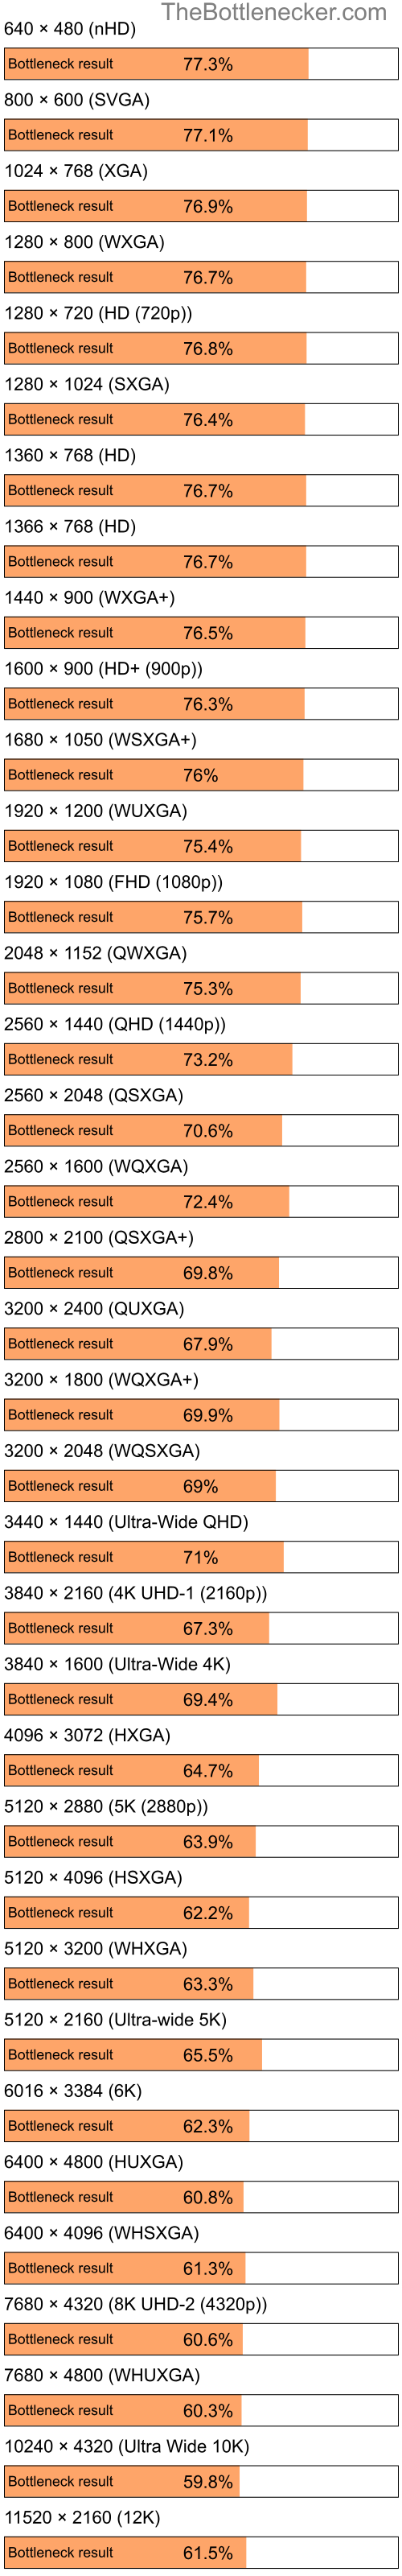 Bottleneck results by resolution for Intel Pentium 4 and NVIDIA GeForce RTX 3050 in Graphic Card Intense Tasks